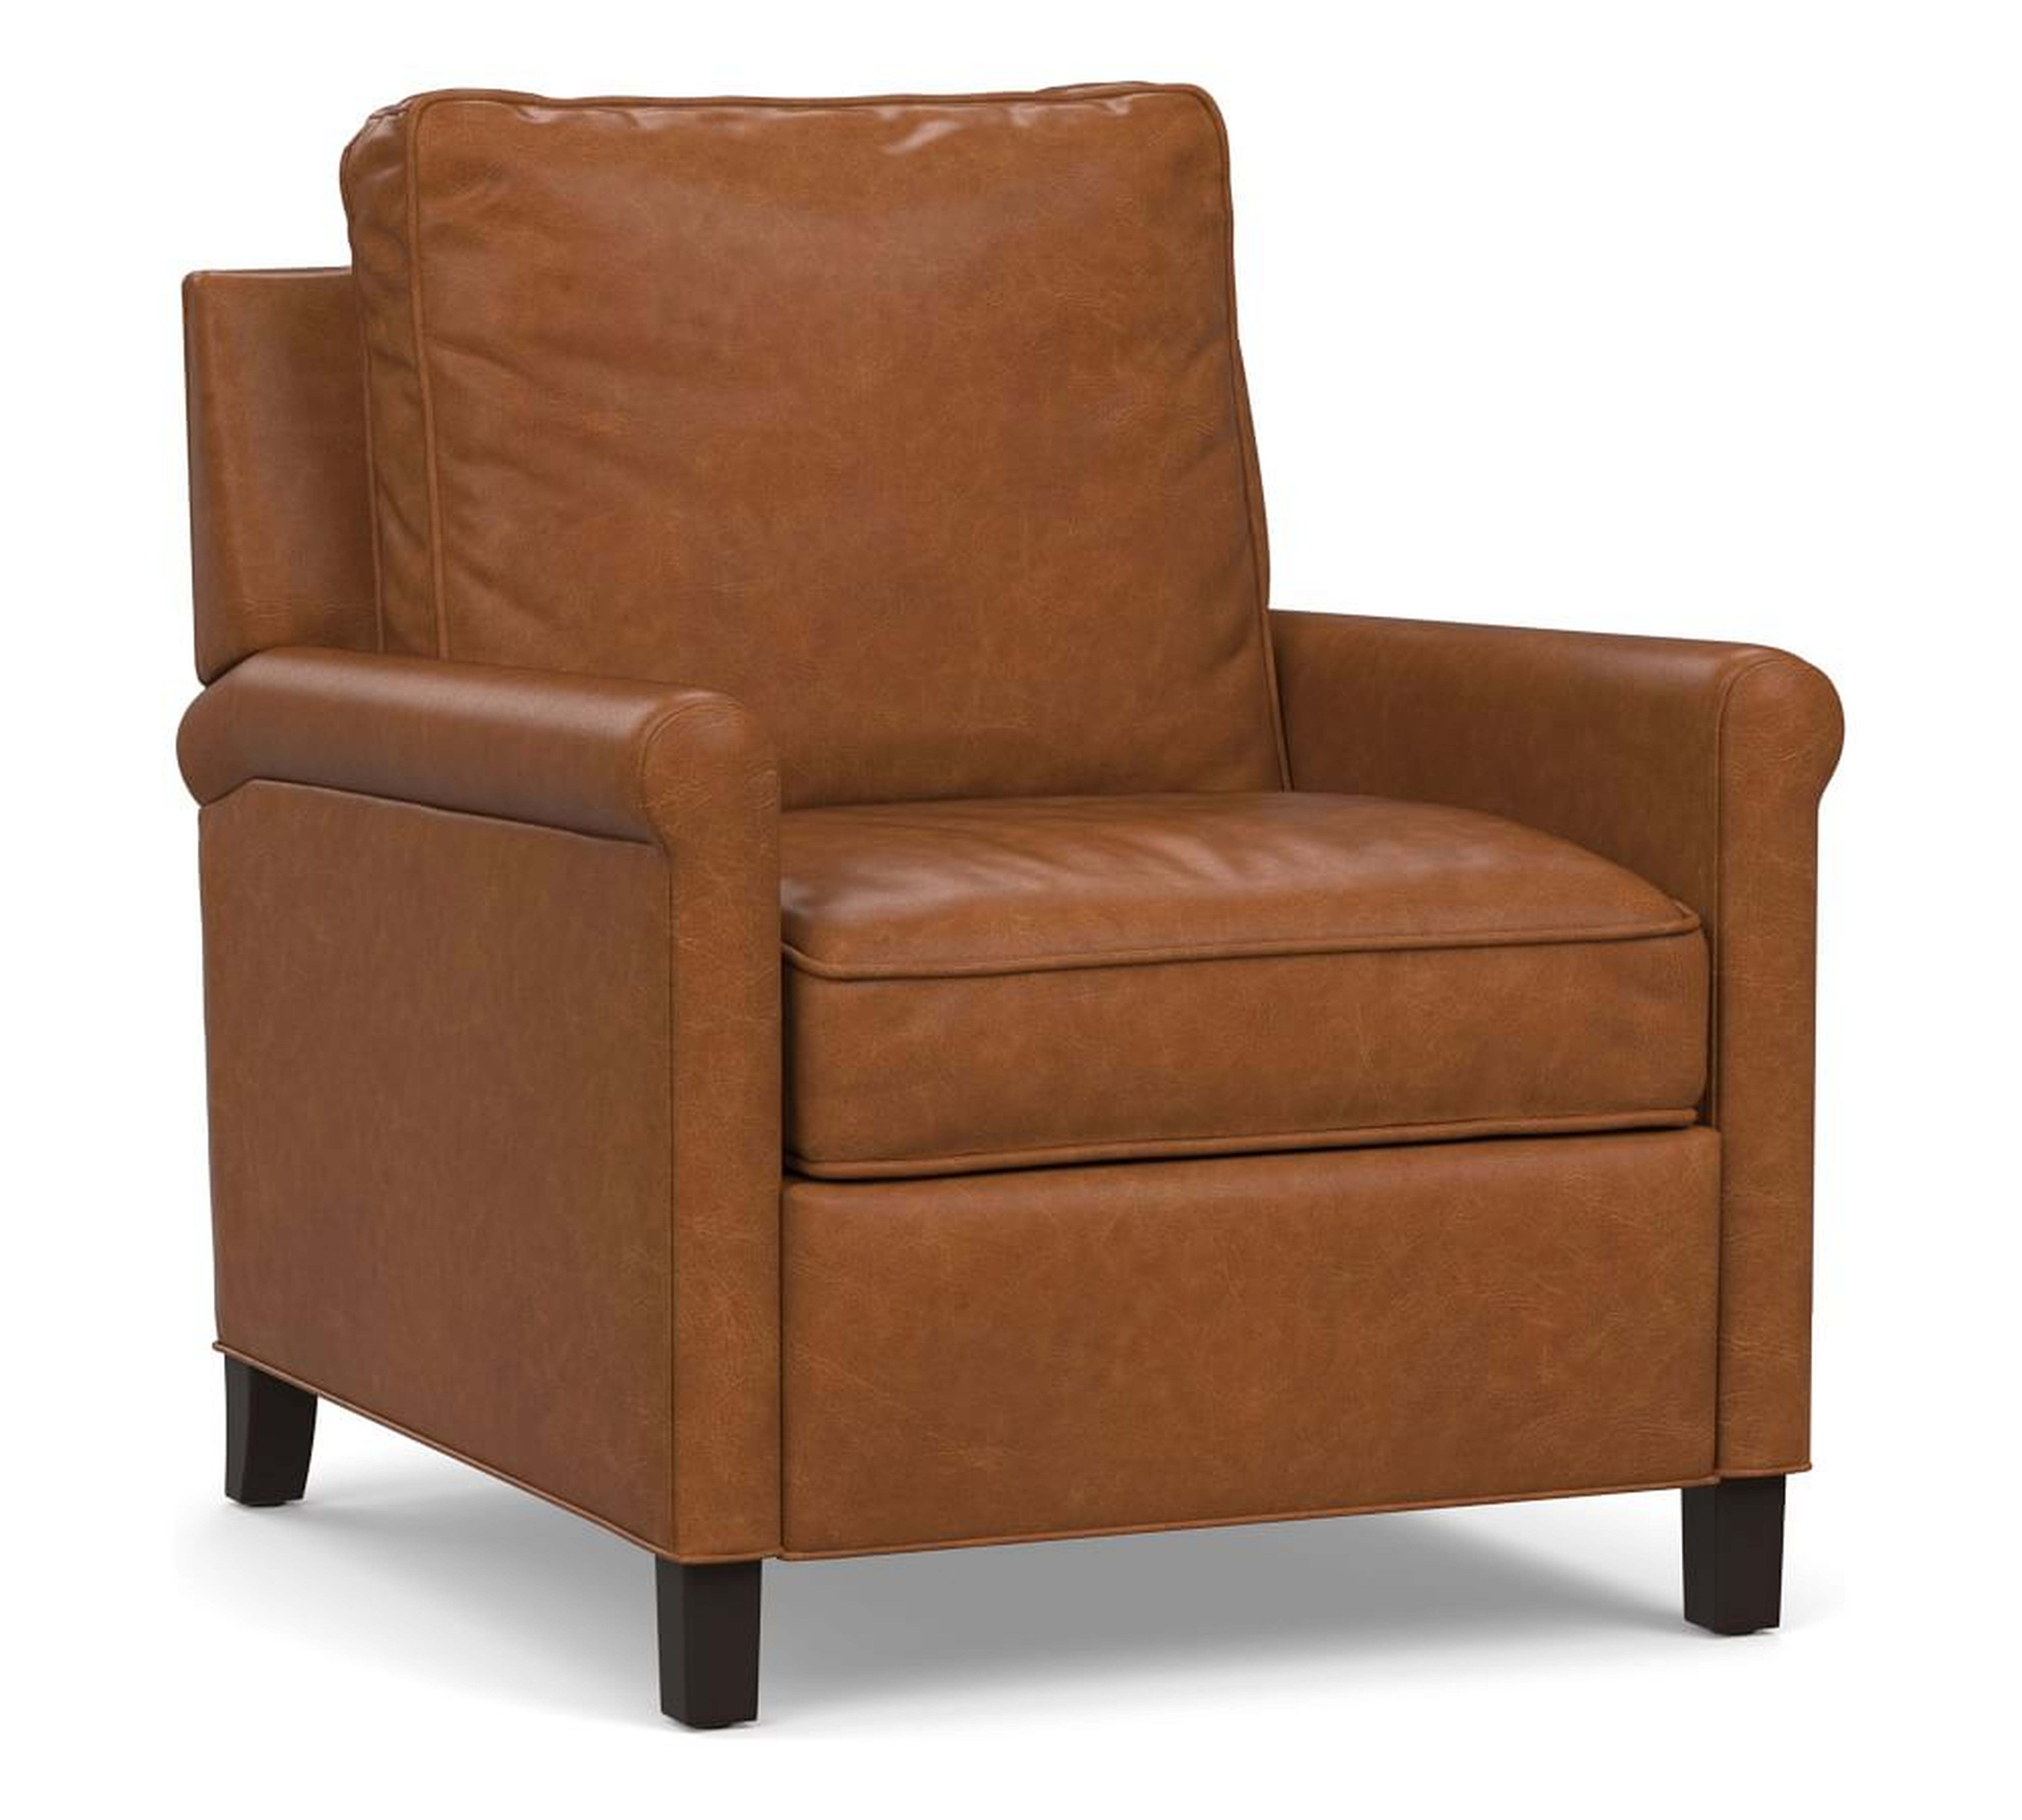 30.5" w x 36.5" d Tyler Roll Arm Leather Recliner without Nailheads, Down Blend Wrapped Cushions, Statesville Caramel - Pottery Barn